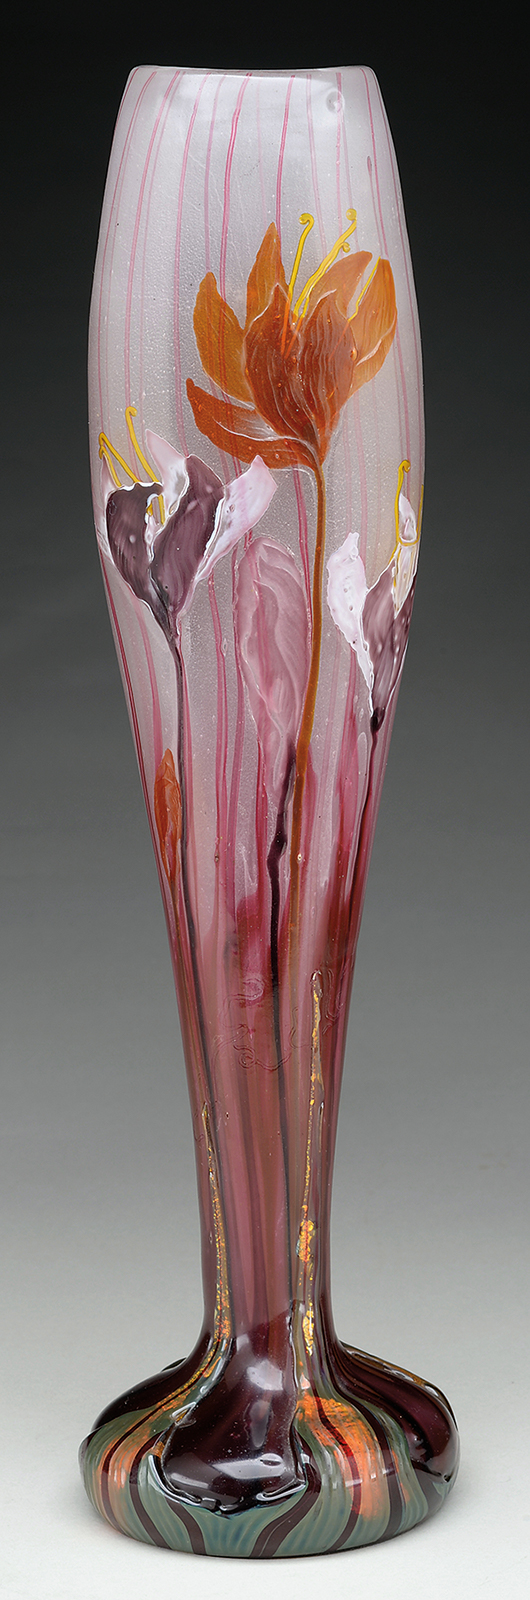 Lot #1058, a Galle Marquetry vase, realized $52,733.